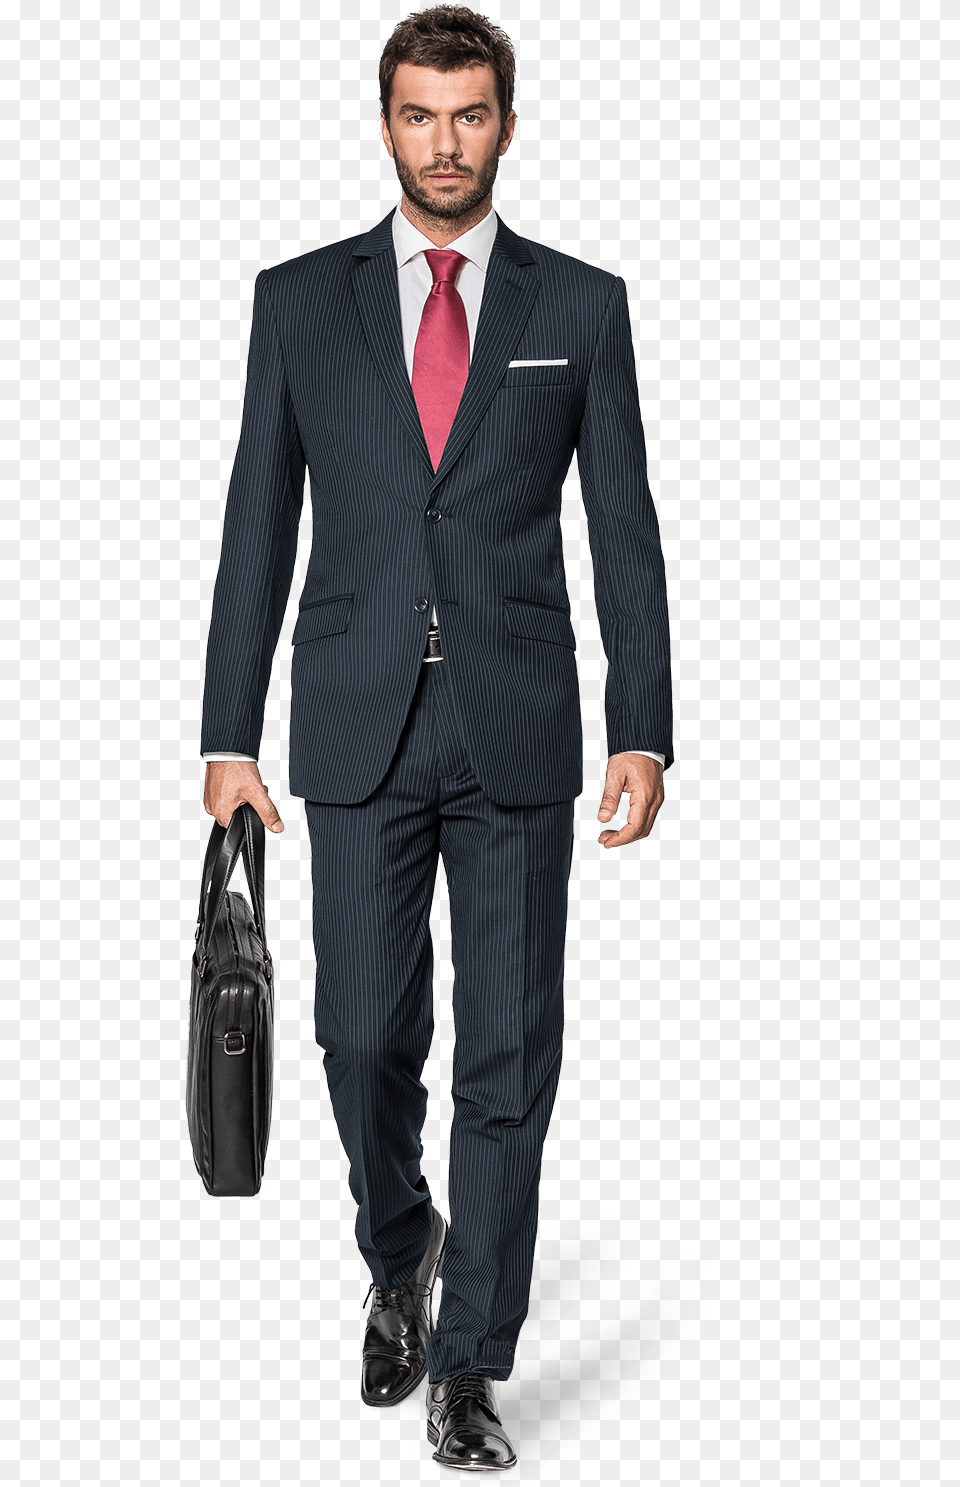 Paul Dano As The Riddler, Tuxedo, Formal Wear, Suit, Clothing Png Image